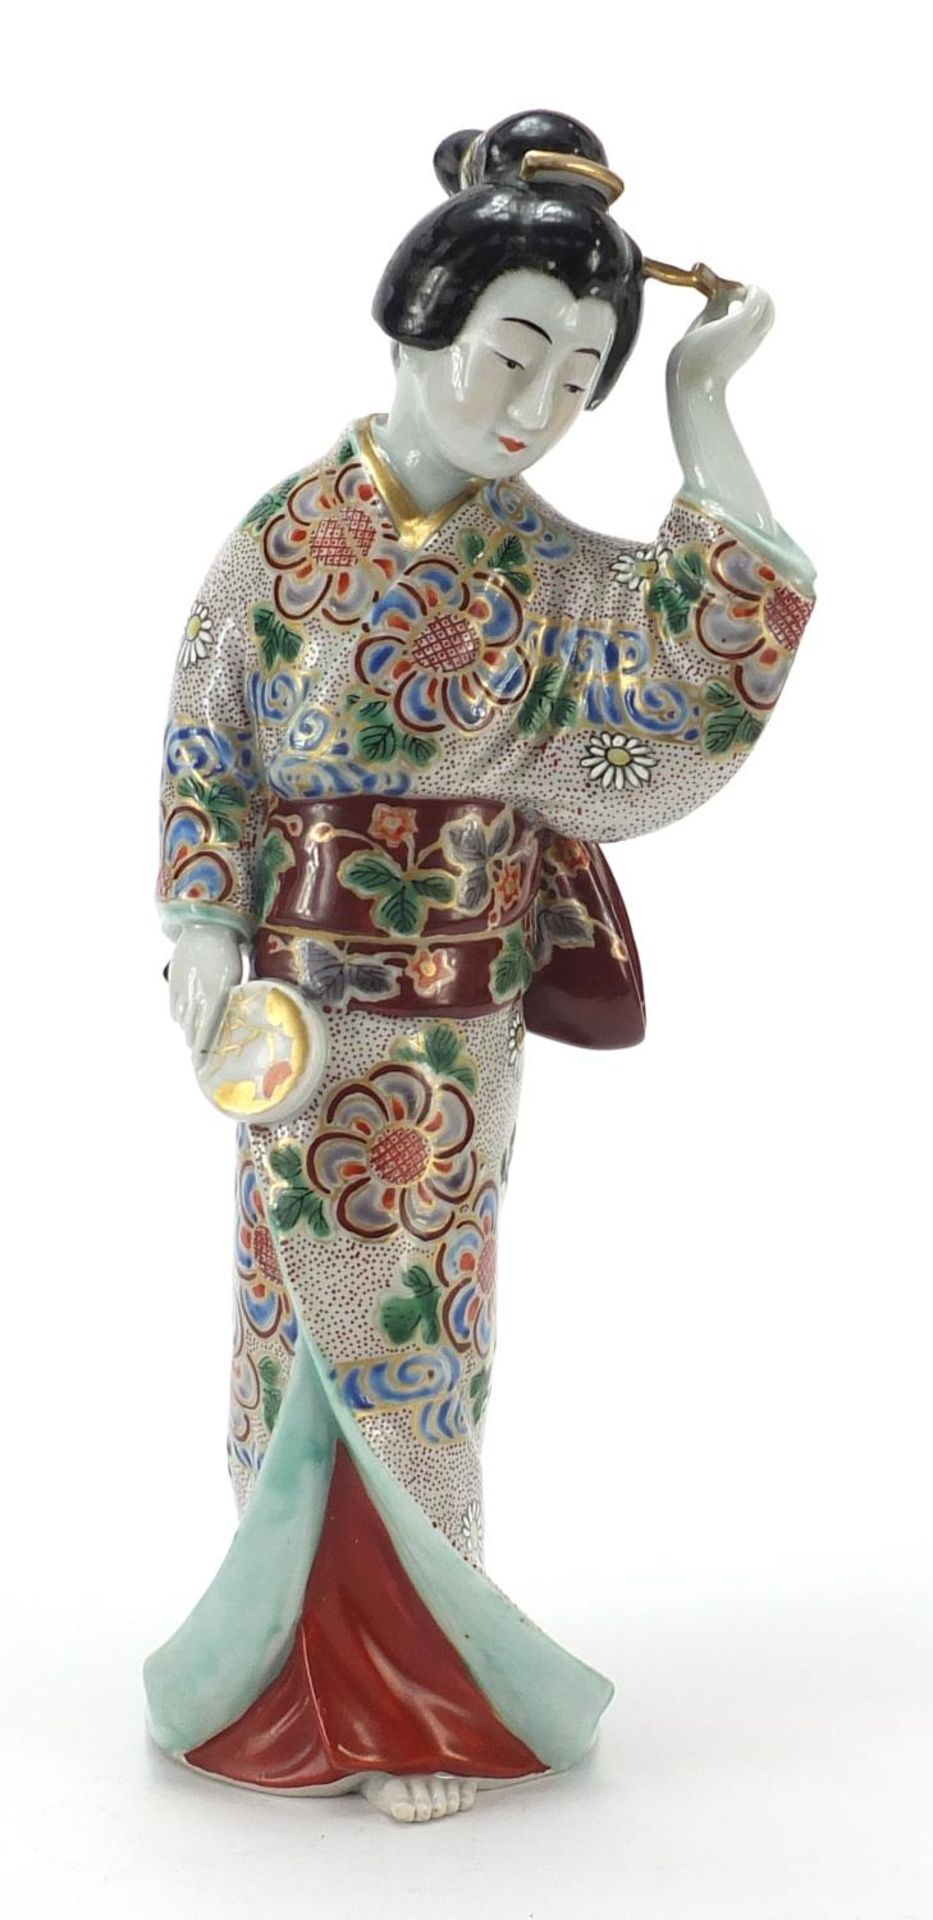 Japanese porcelain figure of a Geisha girl playing with her hair, 32cm high - Image 6 of 8